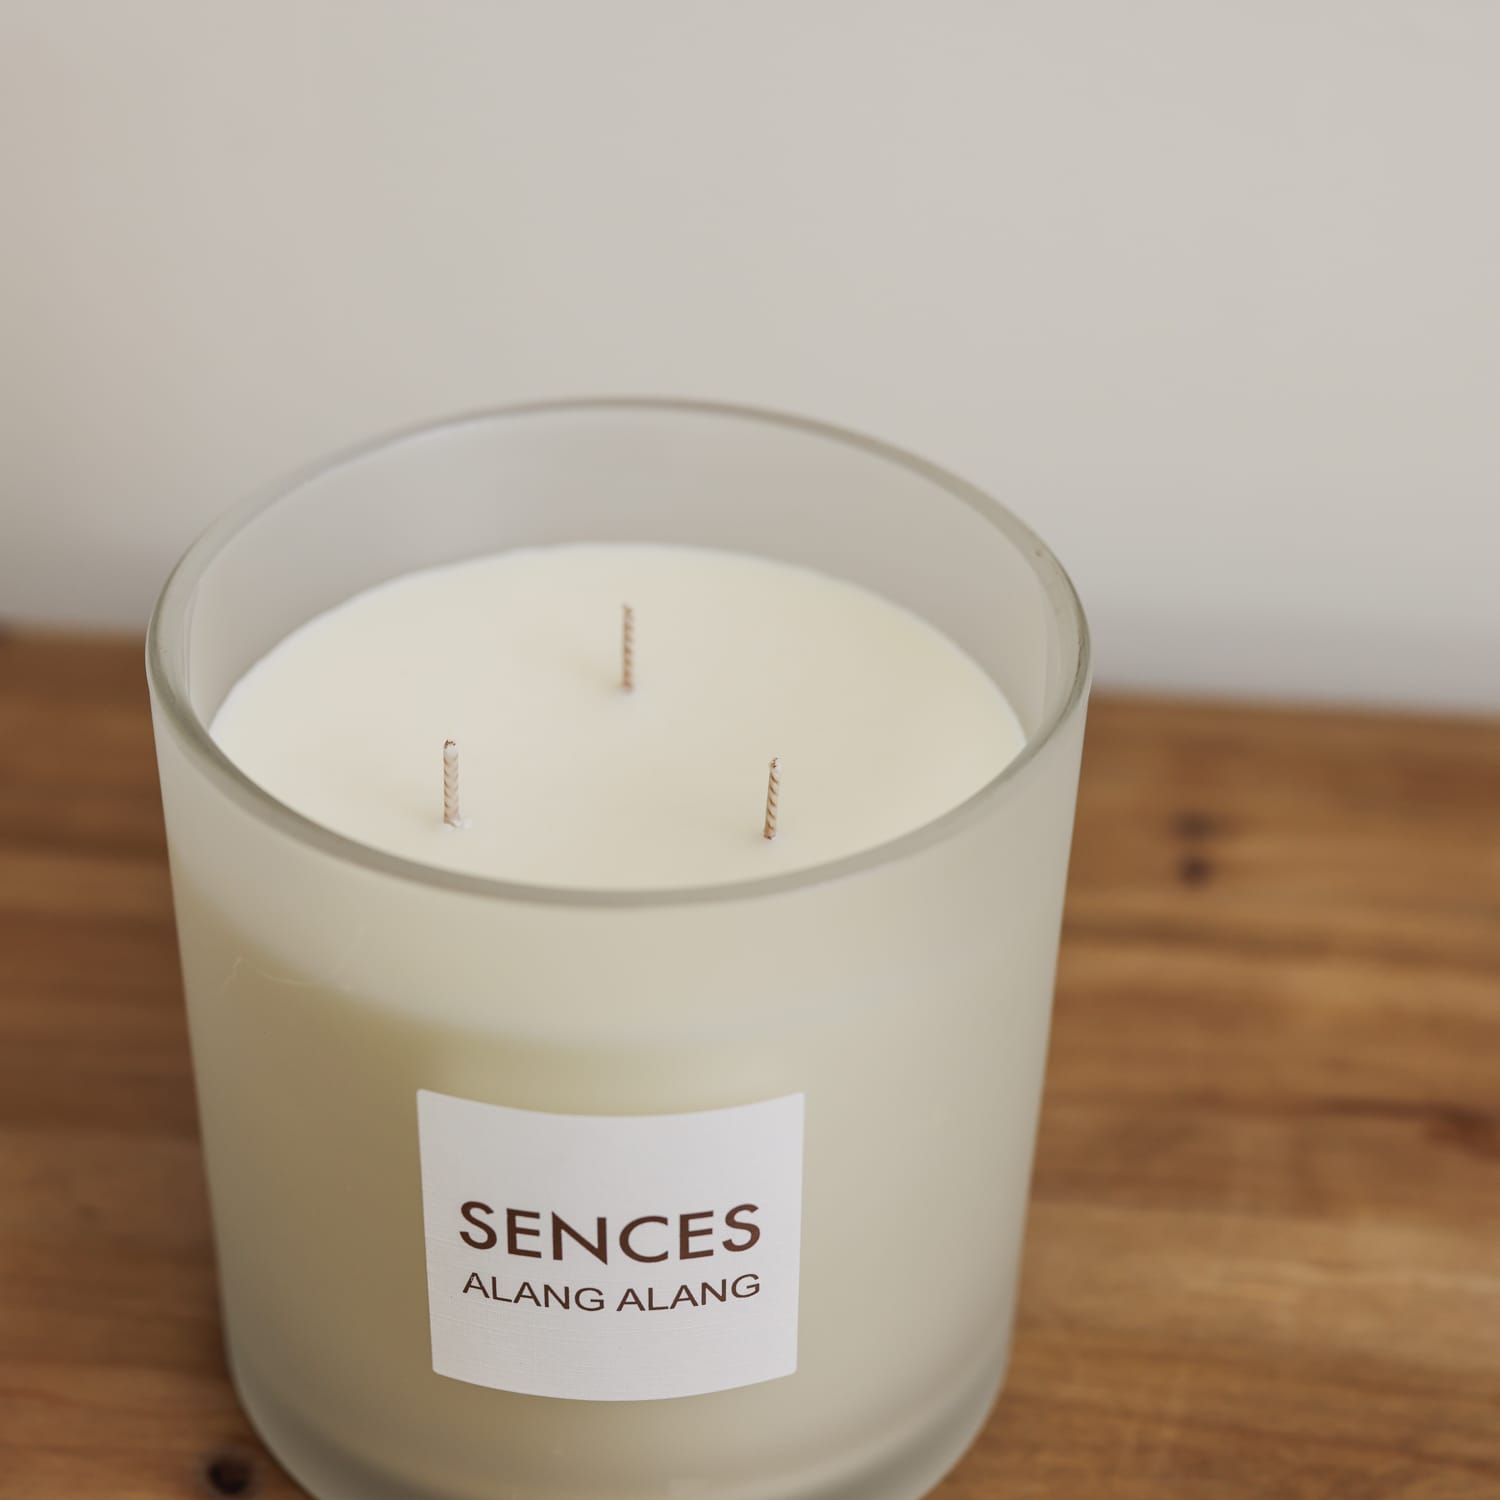 Sences Alang Alang White three wick candle in frosted glass view from above of wicks.